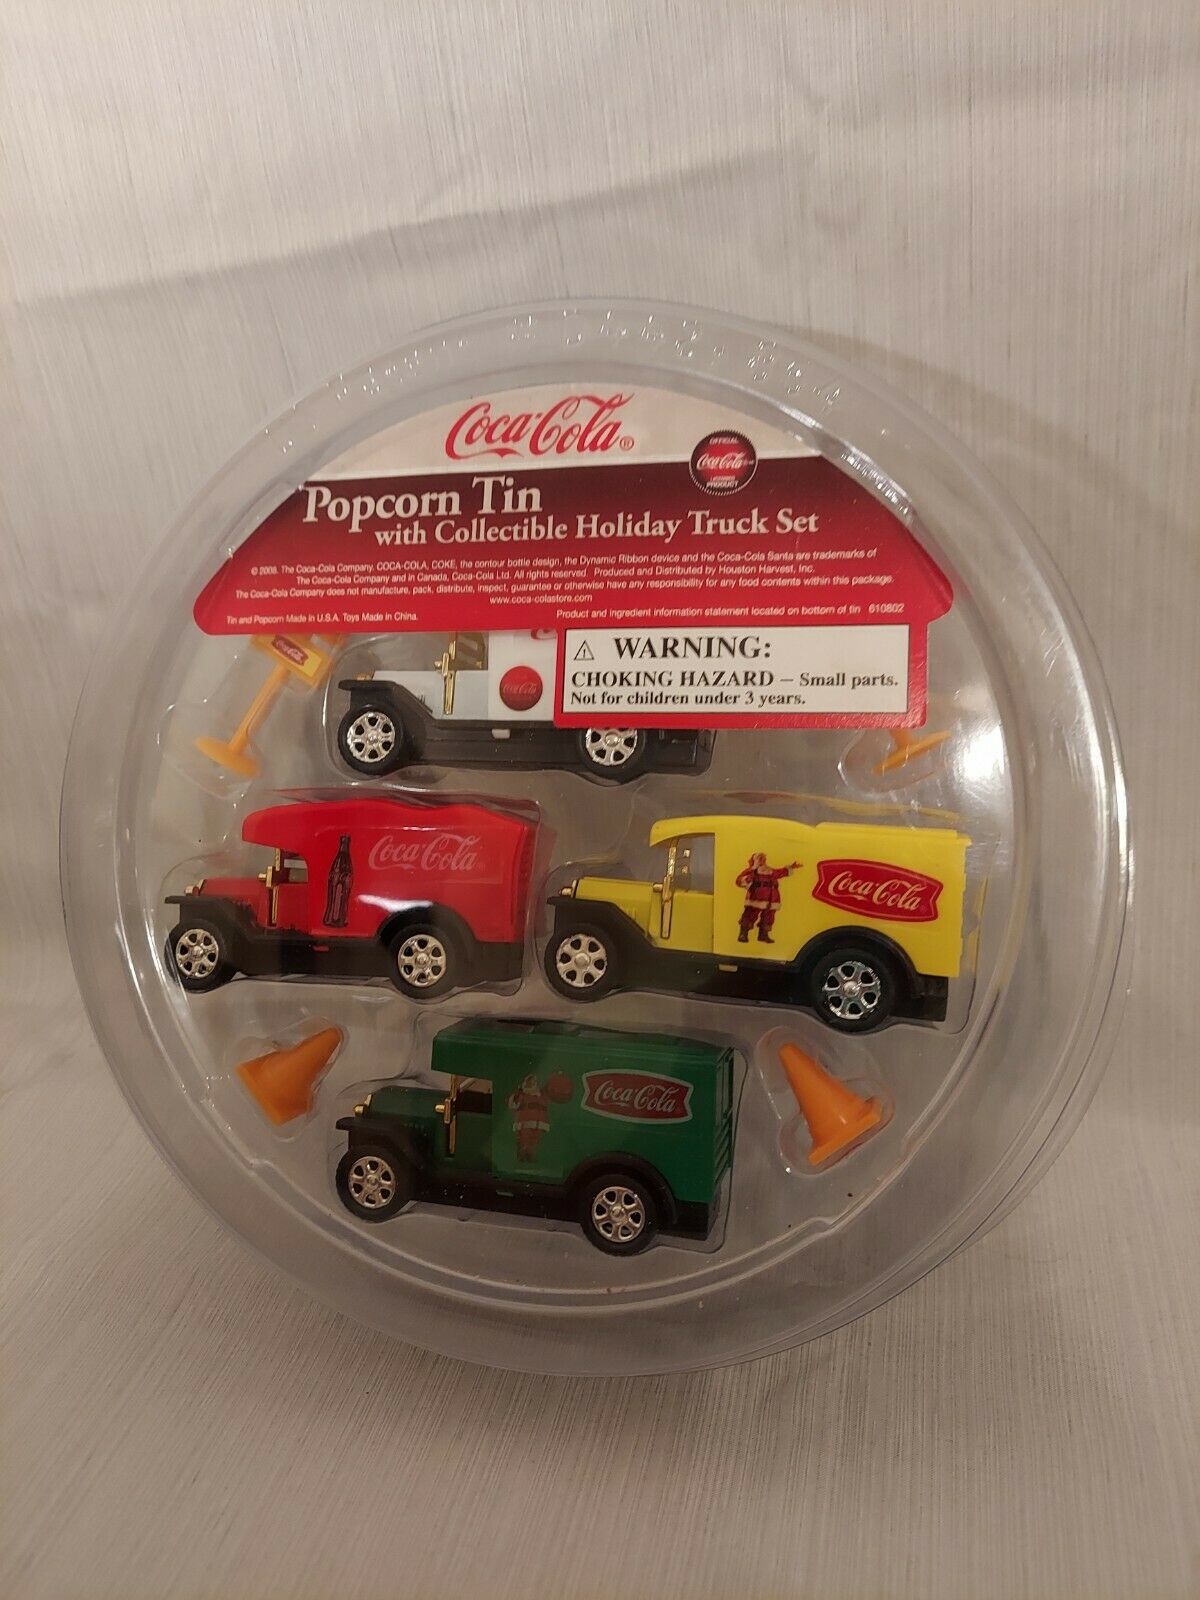 Coca Cola Popcorn Tin With Collectible Truck Set